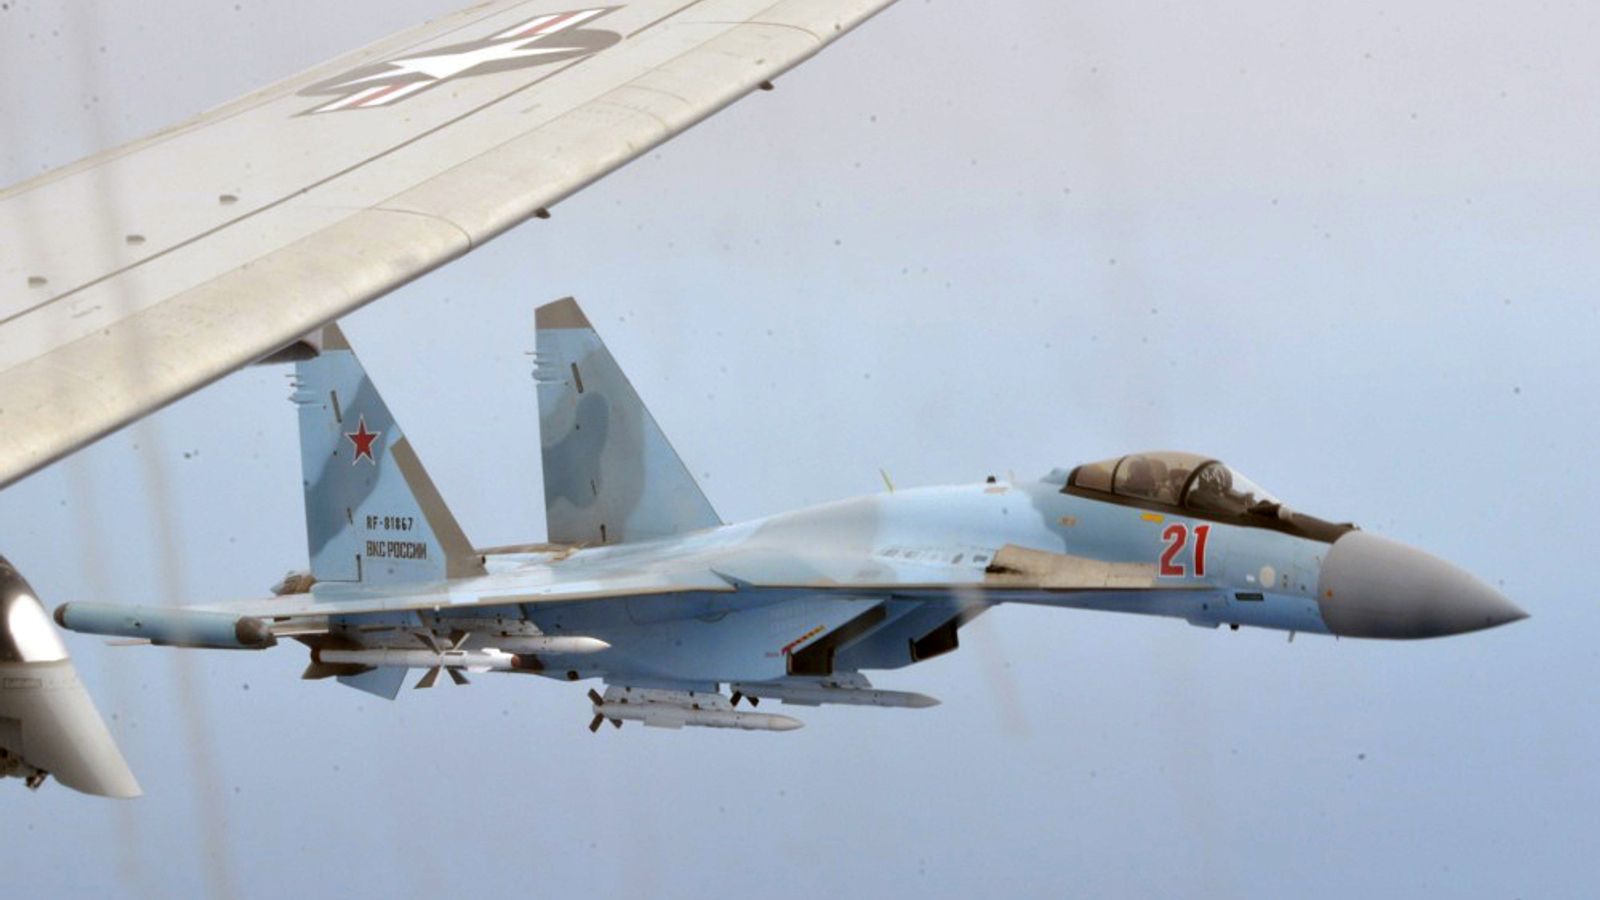 Russian fighter jets 'unsafely' intercept US plane over